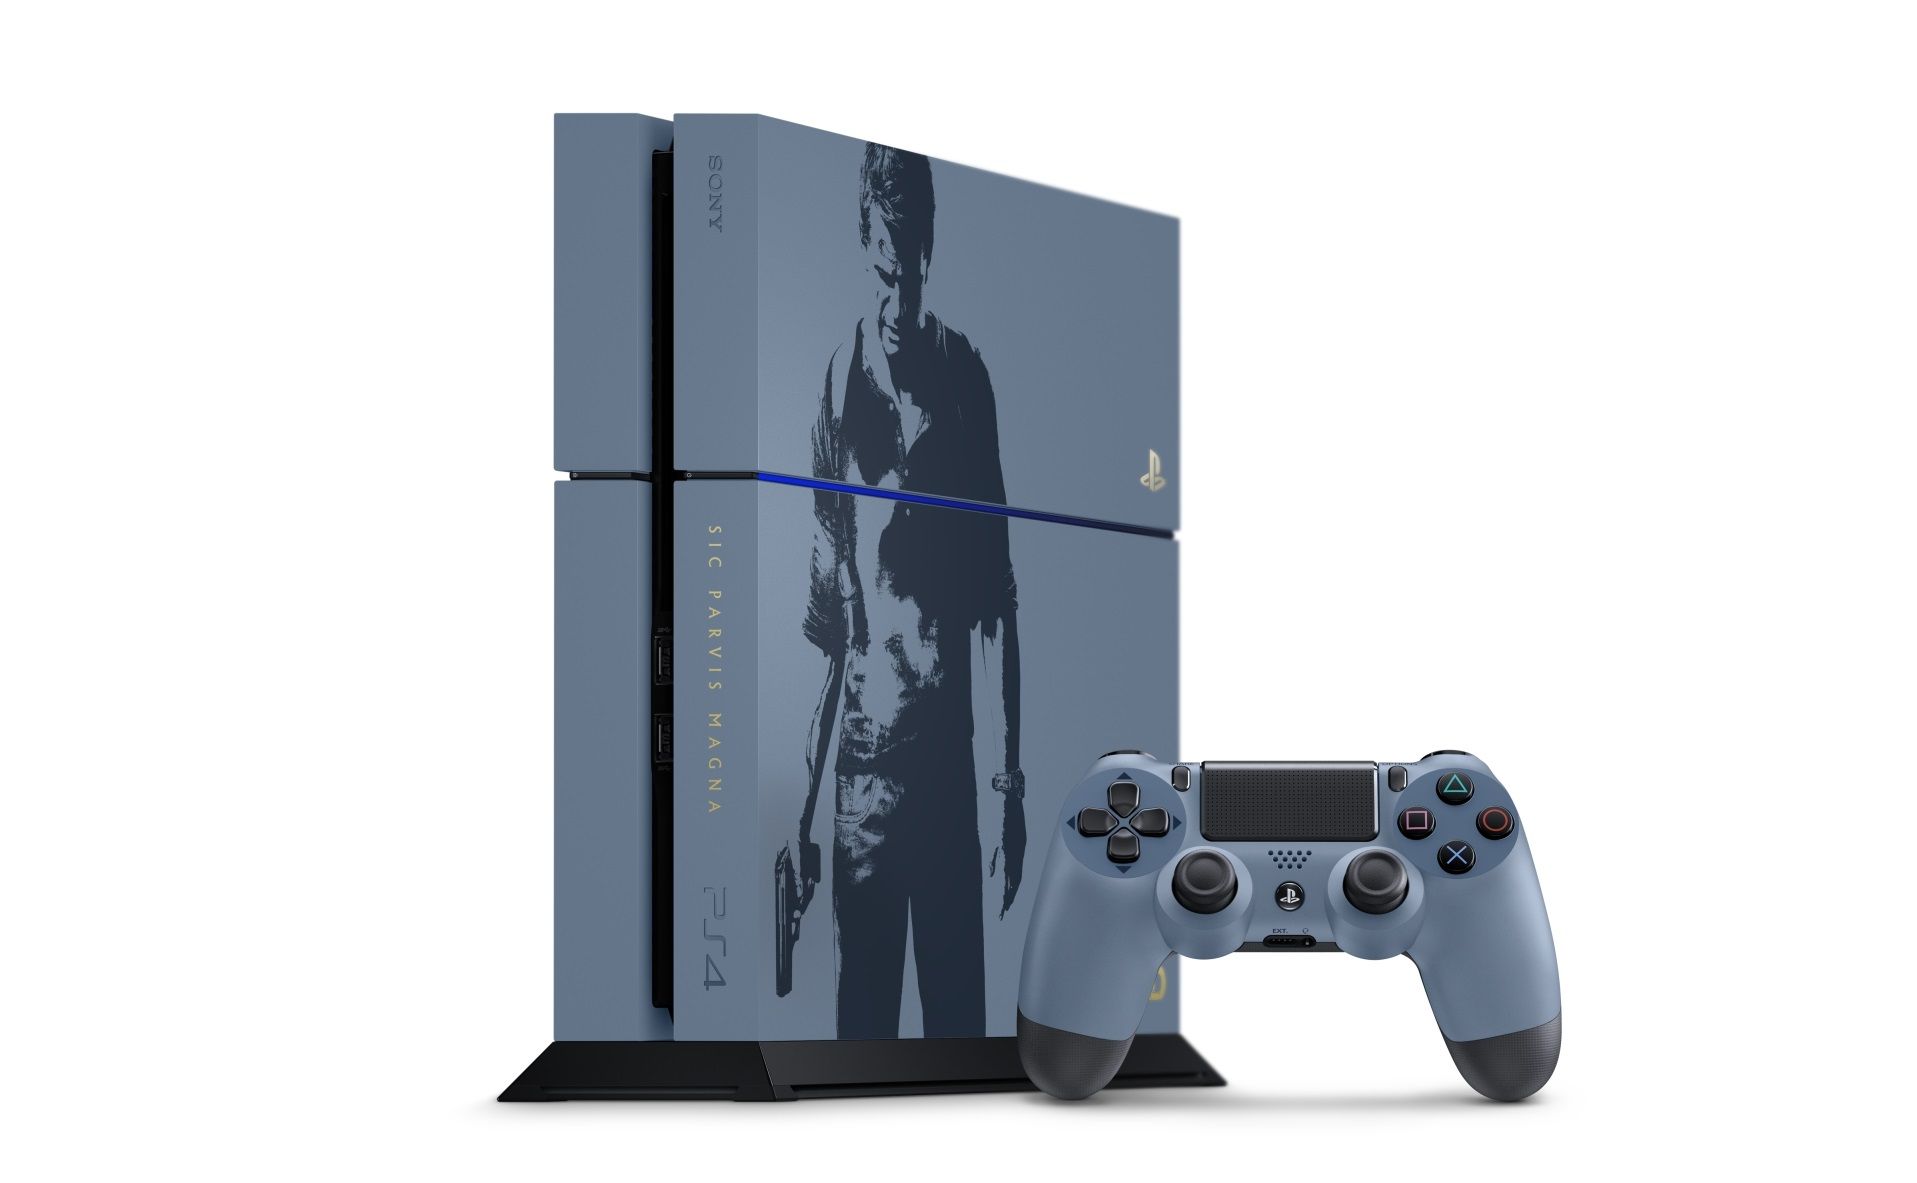 A limited-edition Uncharted 4 PS4 has been announced, and actually quite pretty